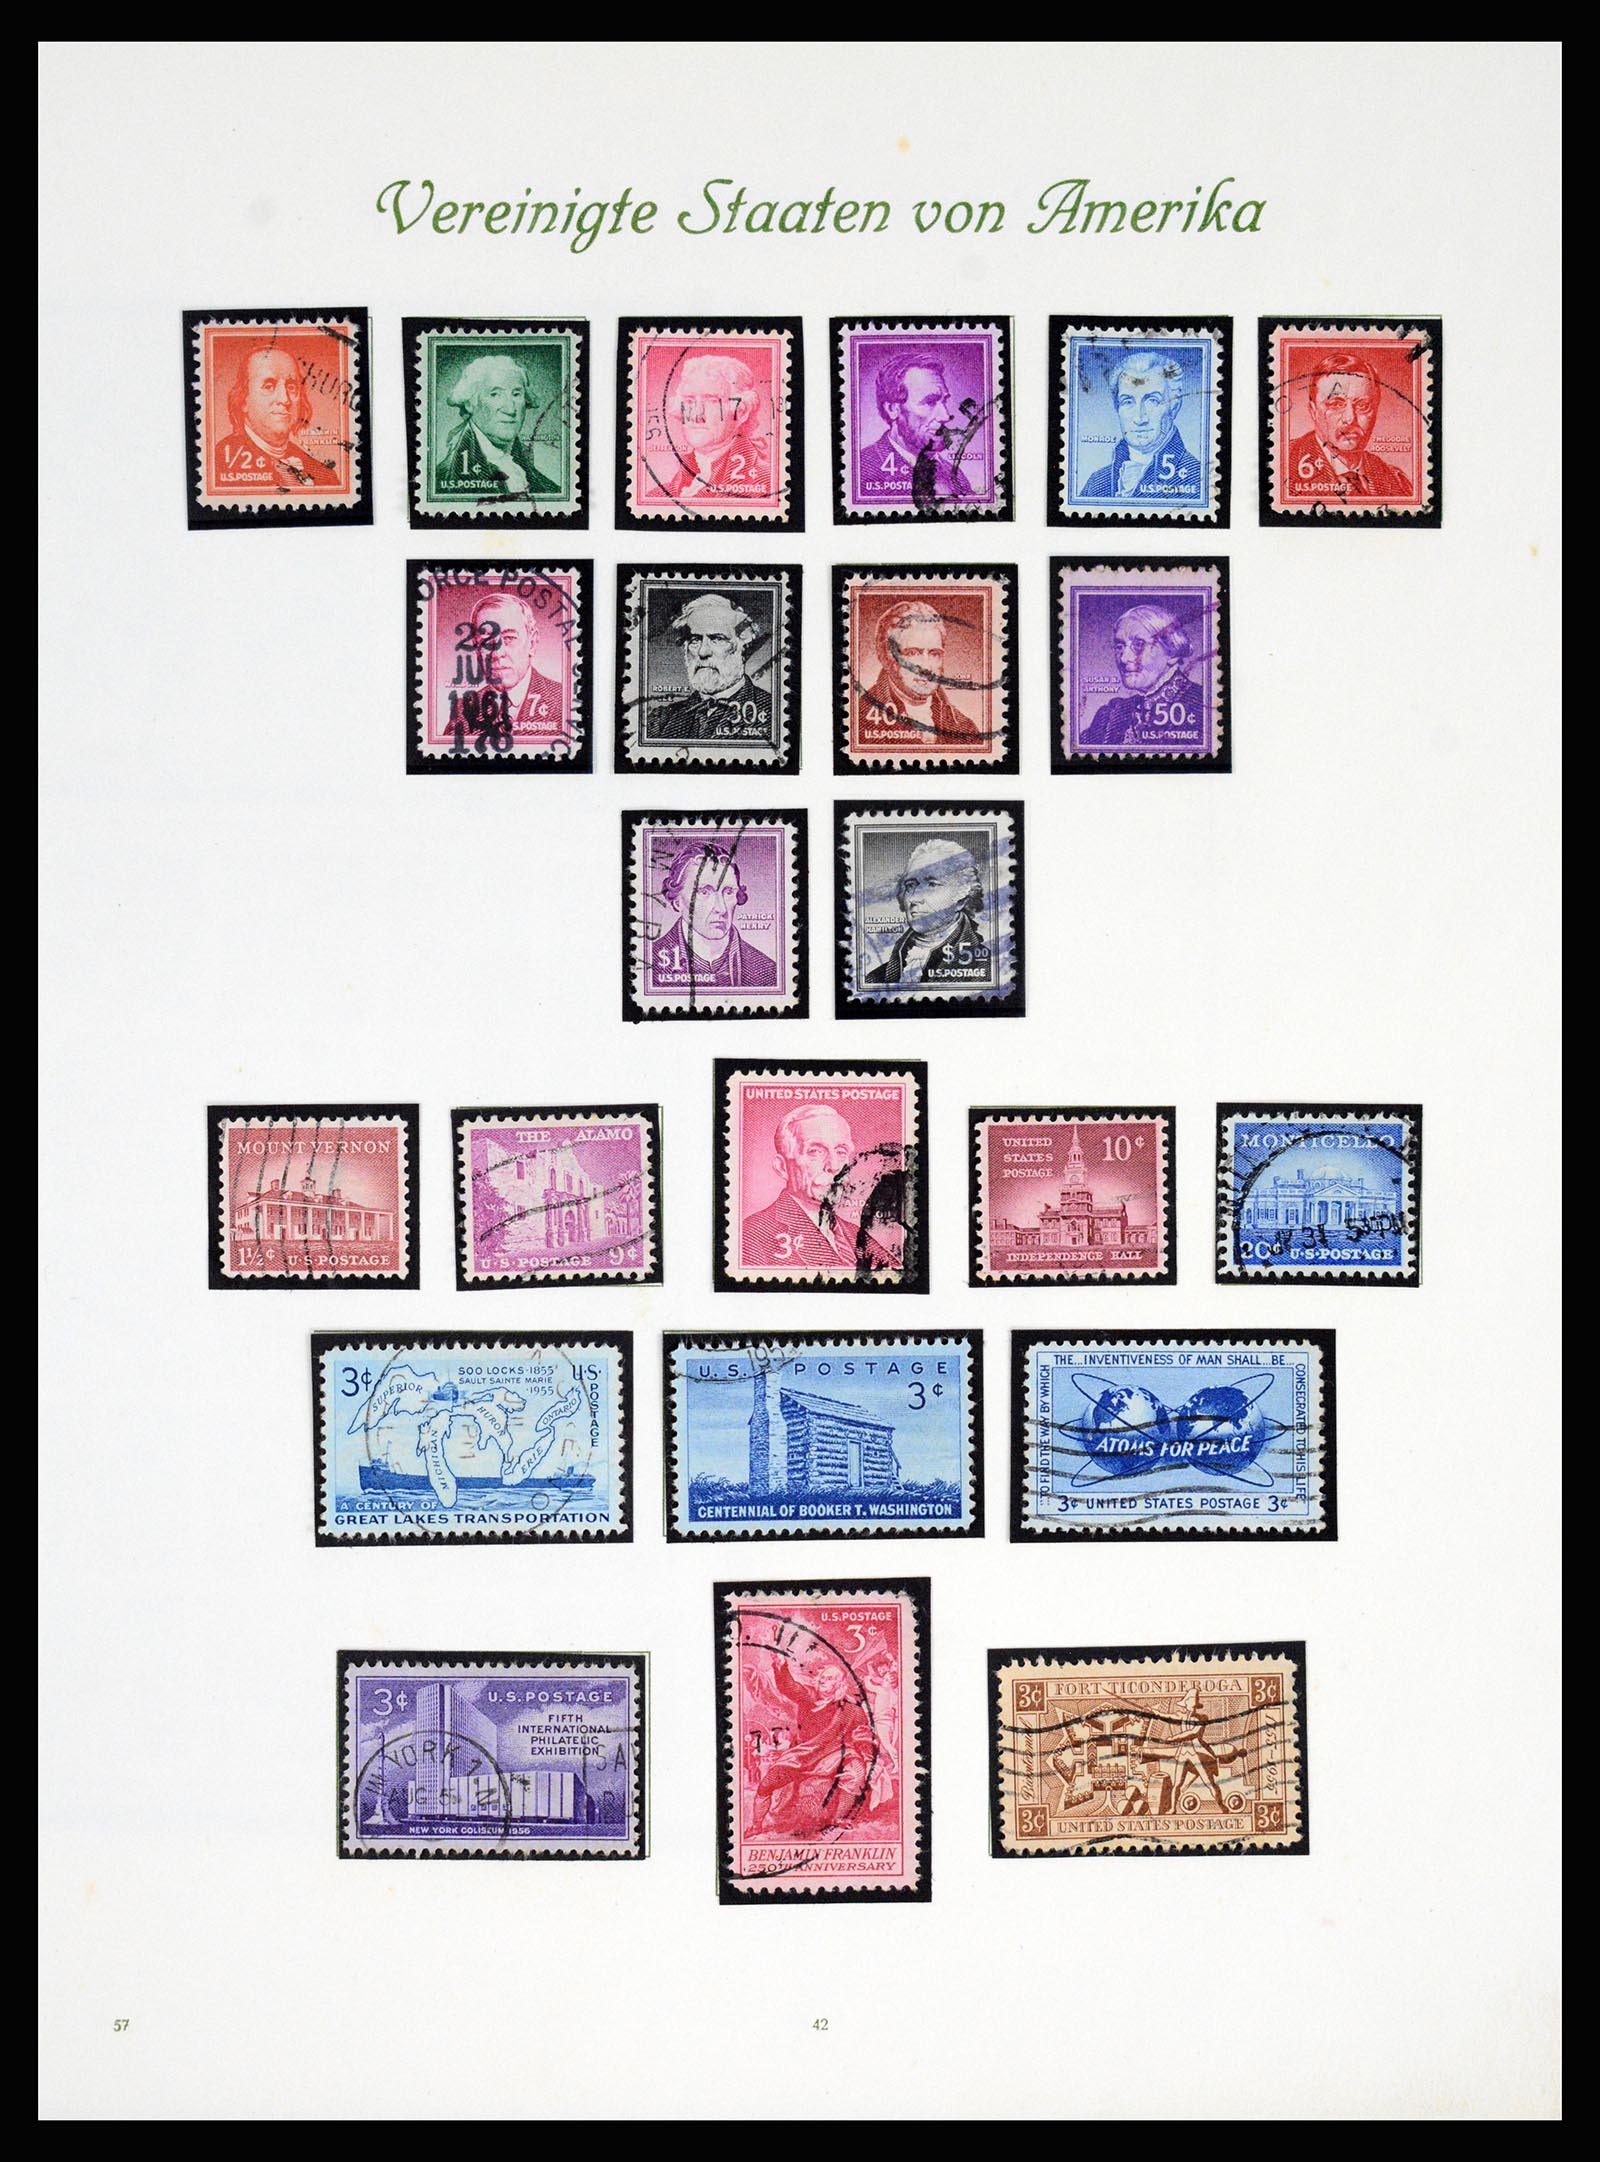 37125 043 - Stamp collection 37125 USA supercollection 1847-1963.